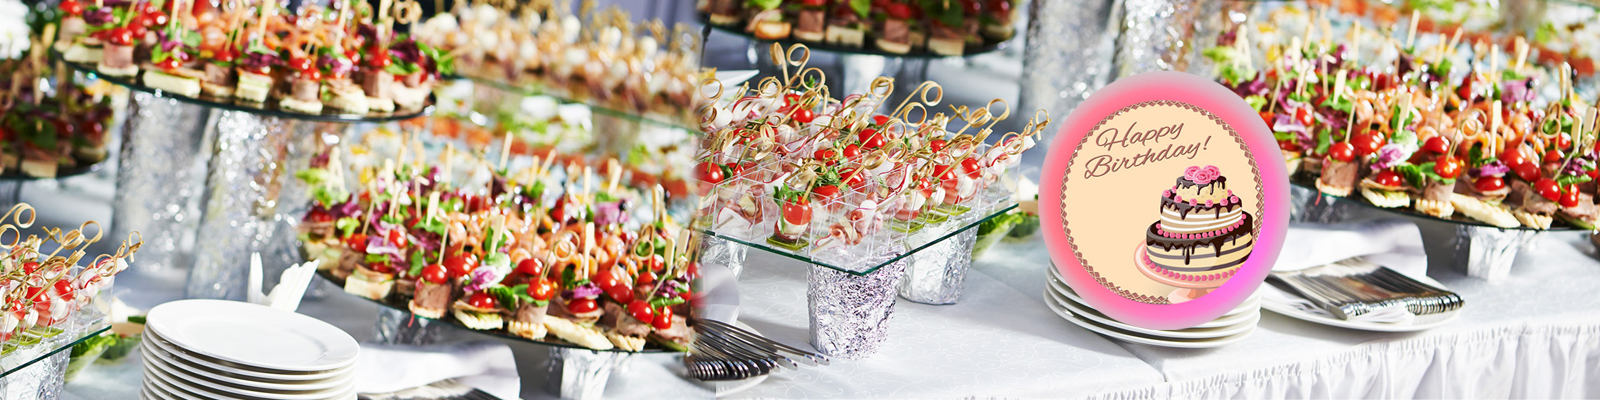 Best Birthday Party Catering Services in Bangalore